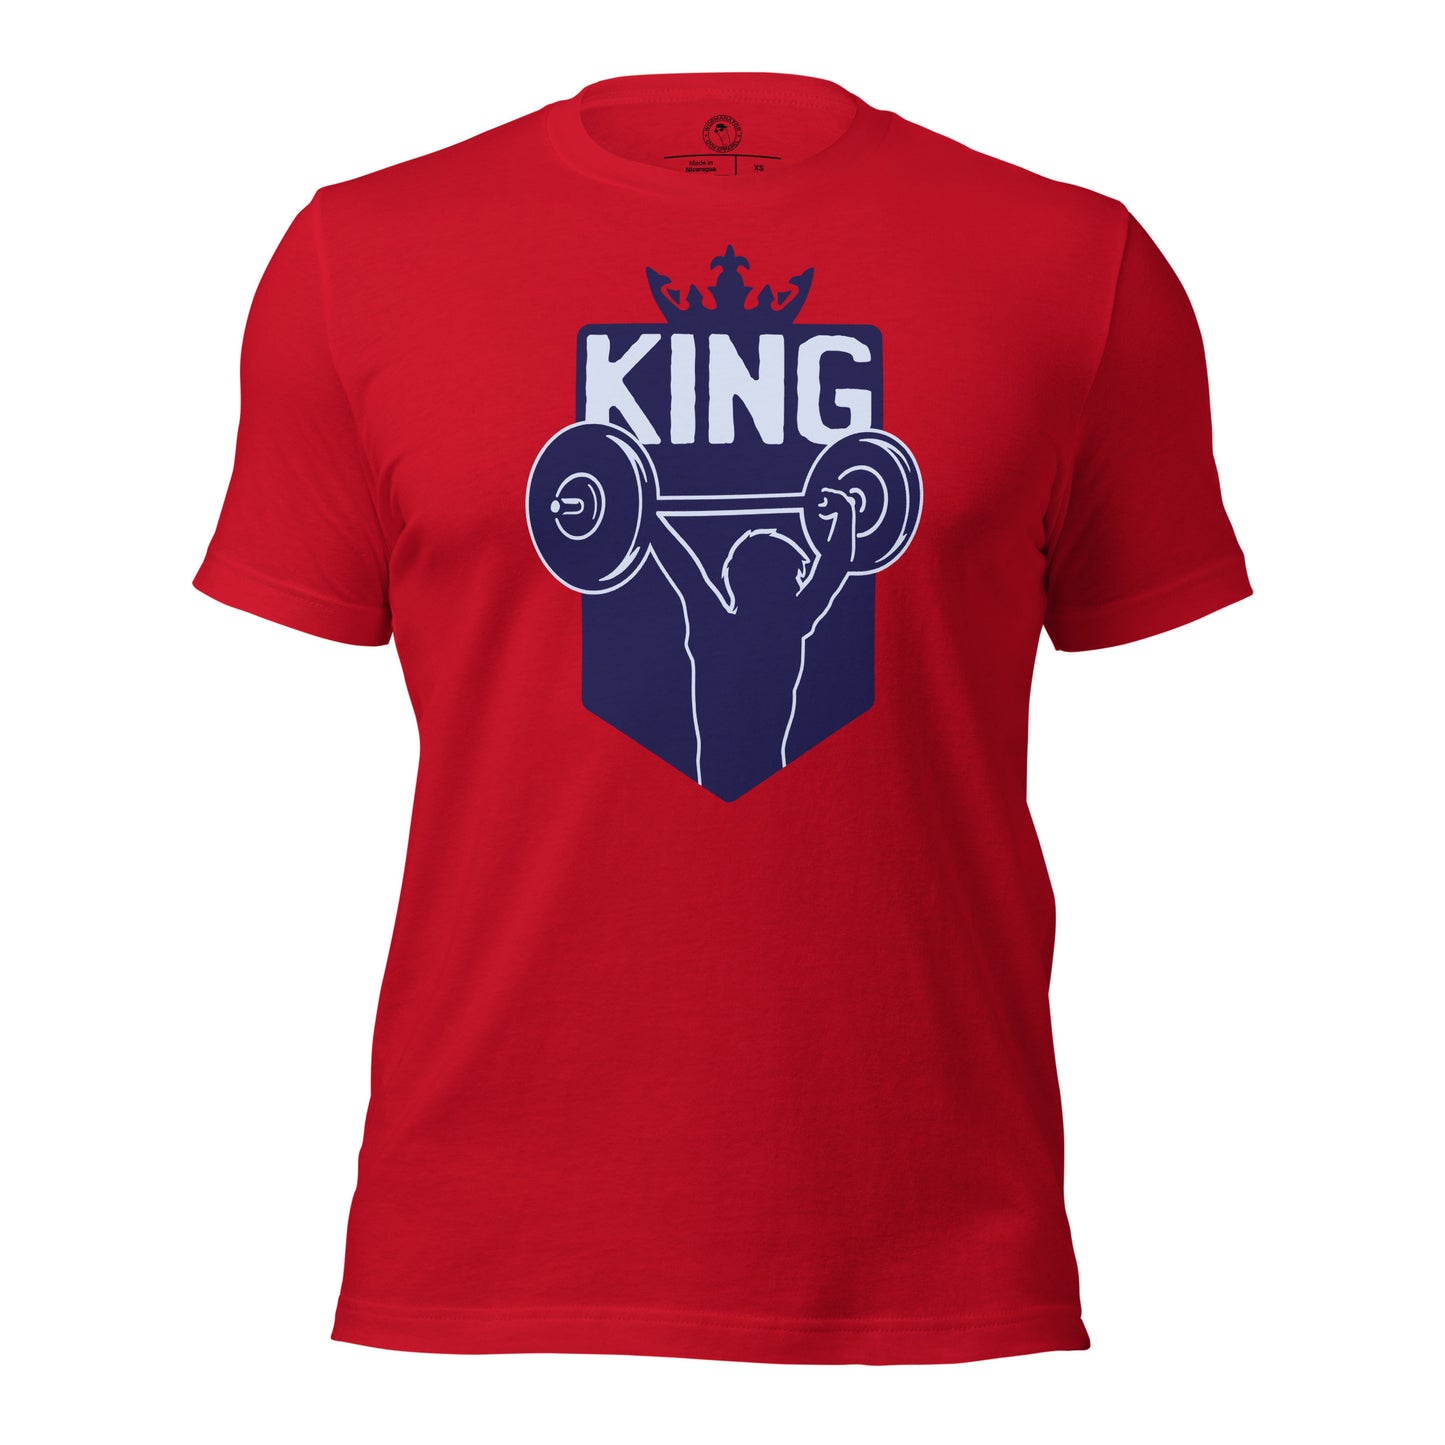 Gym King Shirt in Red